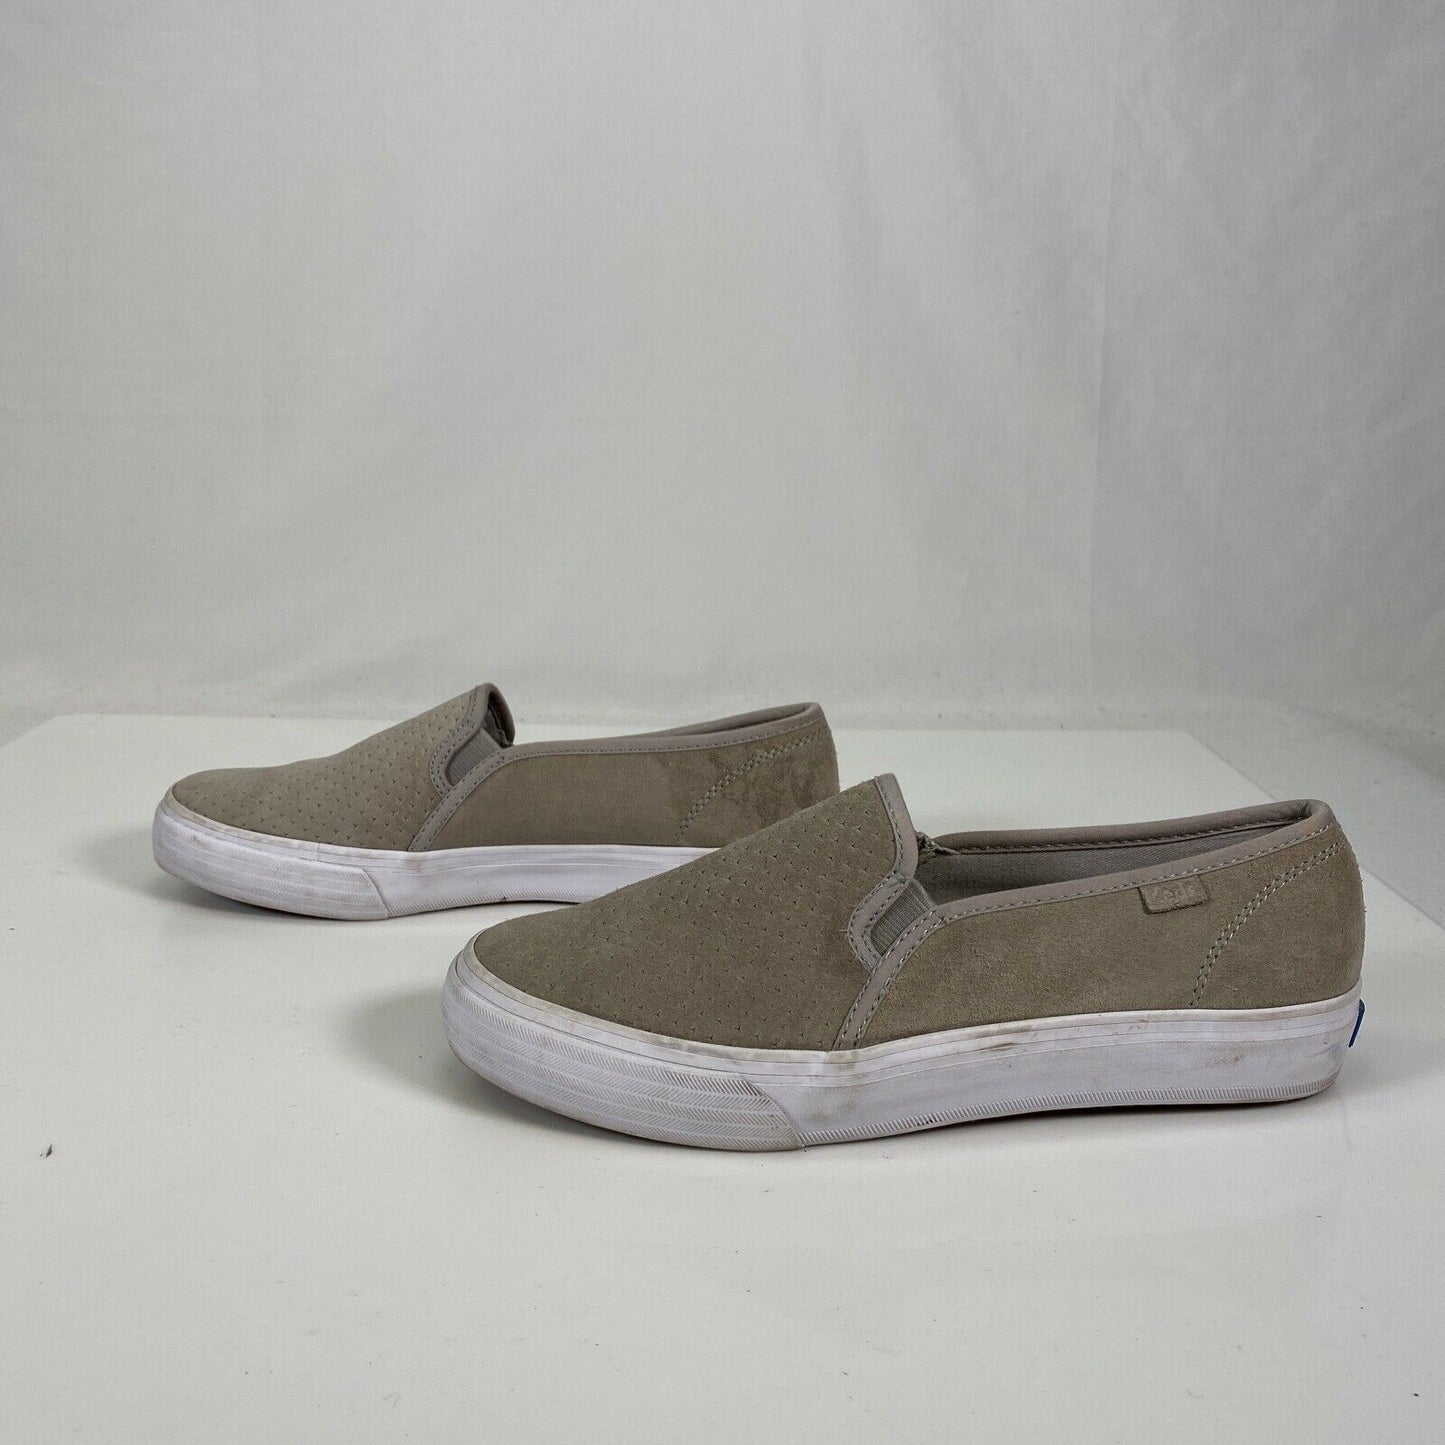 Keds Women's Gray Slip On Suede Sneakers Shoes Sz 6.5